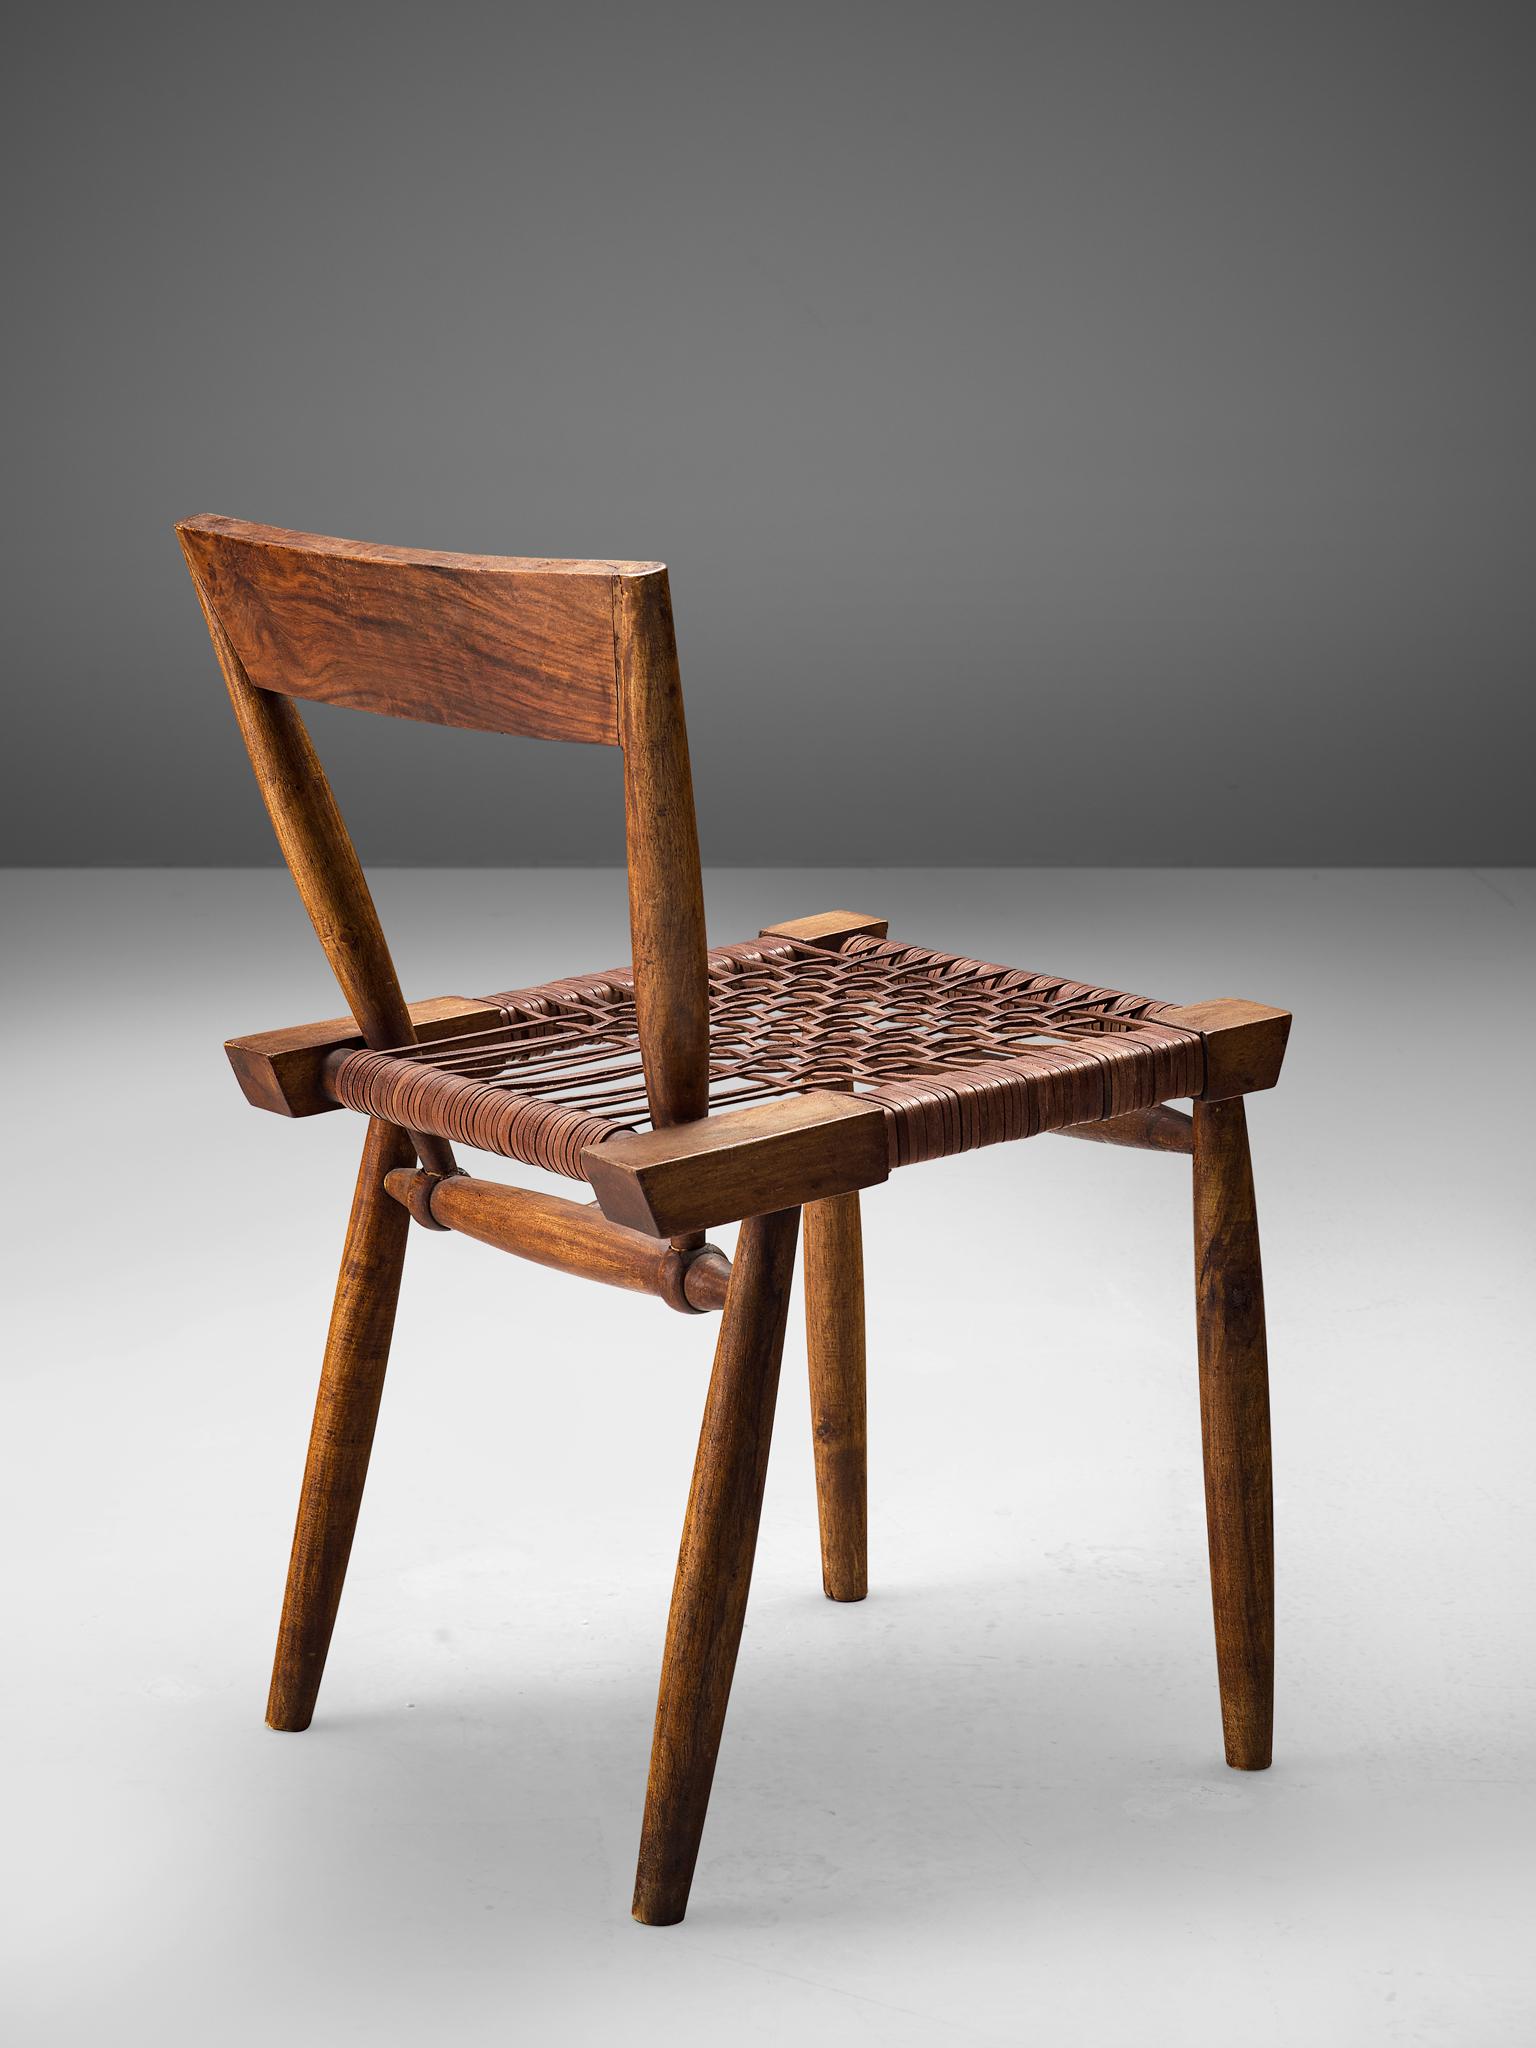 Side chair, leather and hardwood, United States, 1950s

This American handcrafted chair is as sculptural as it can get. A combination of sturdy shapes and elegant, slender lines is well-considered. The walnut frame consists of a subtle curved